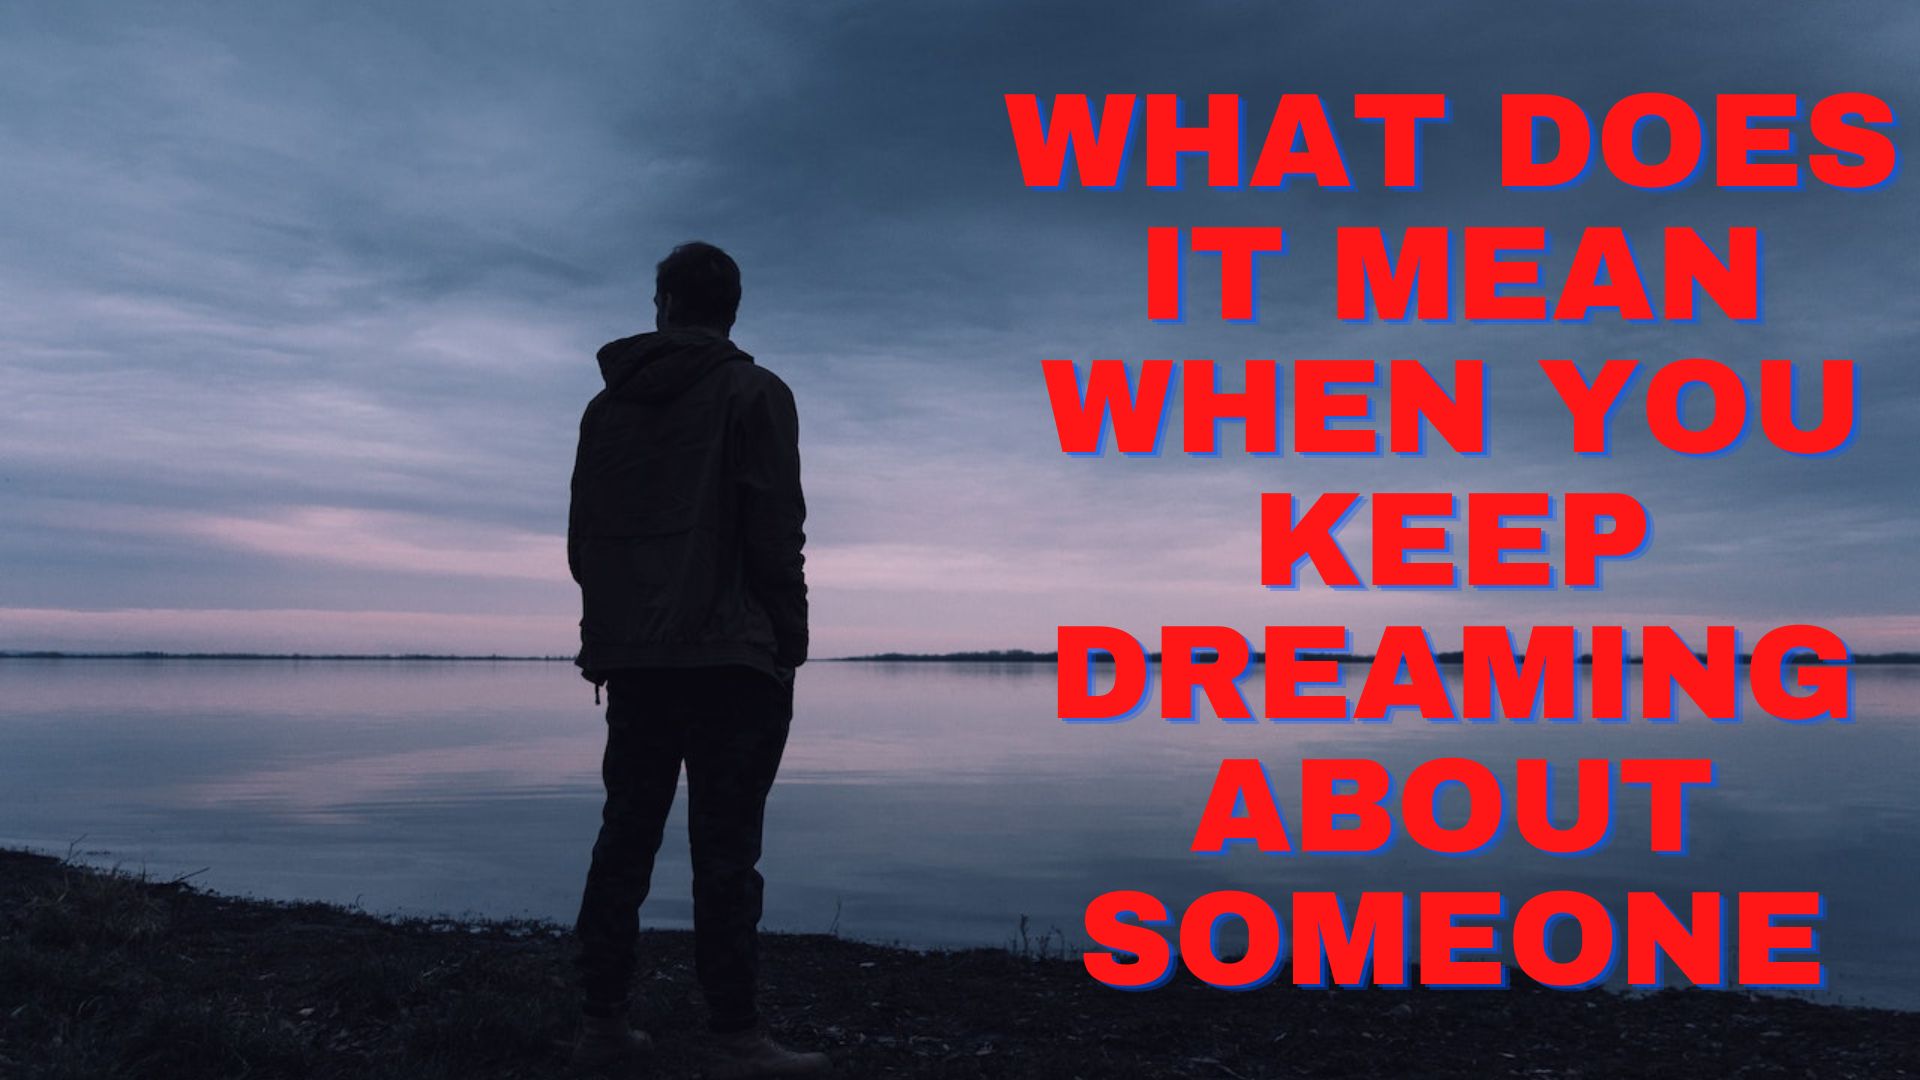 What Does It Mean When You Keep Dreaming About Someone?